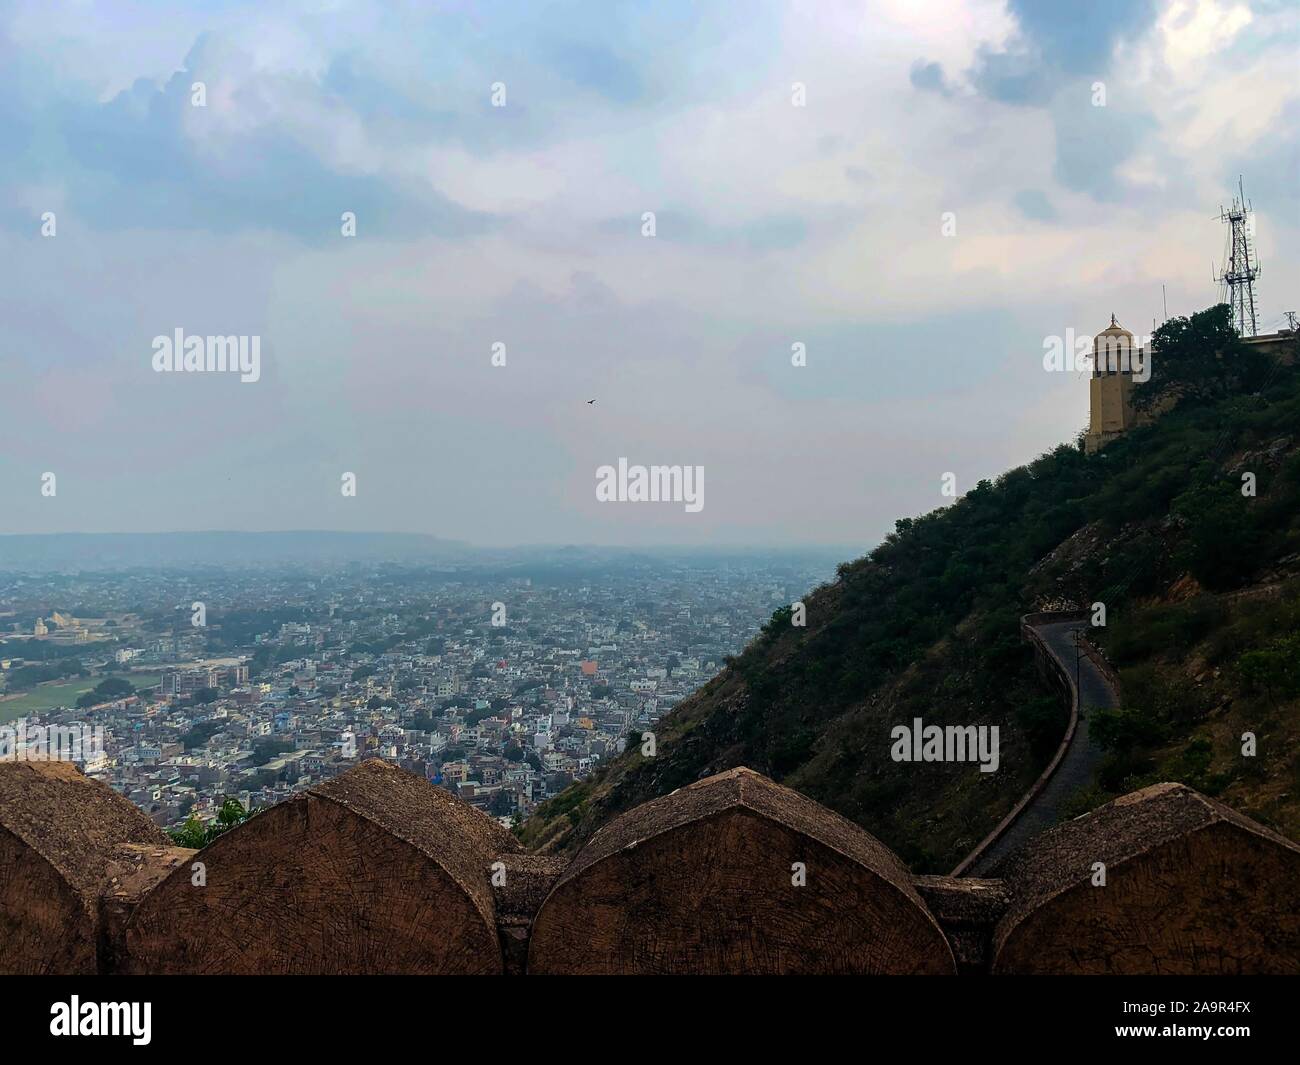 View of the Jaipur city from Nahargarh fort/Jaipur/India Stock Photo